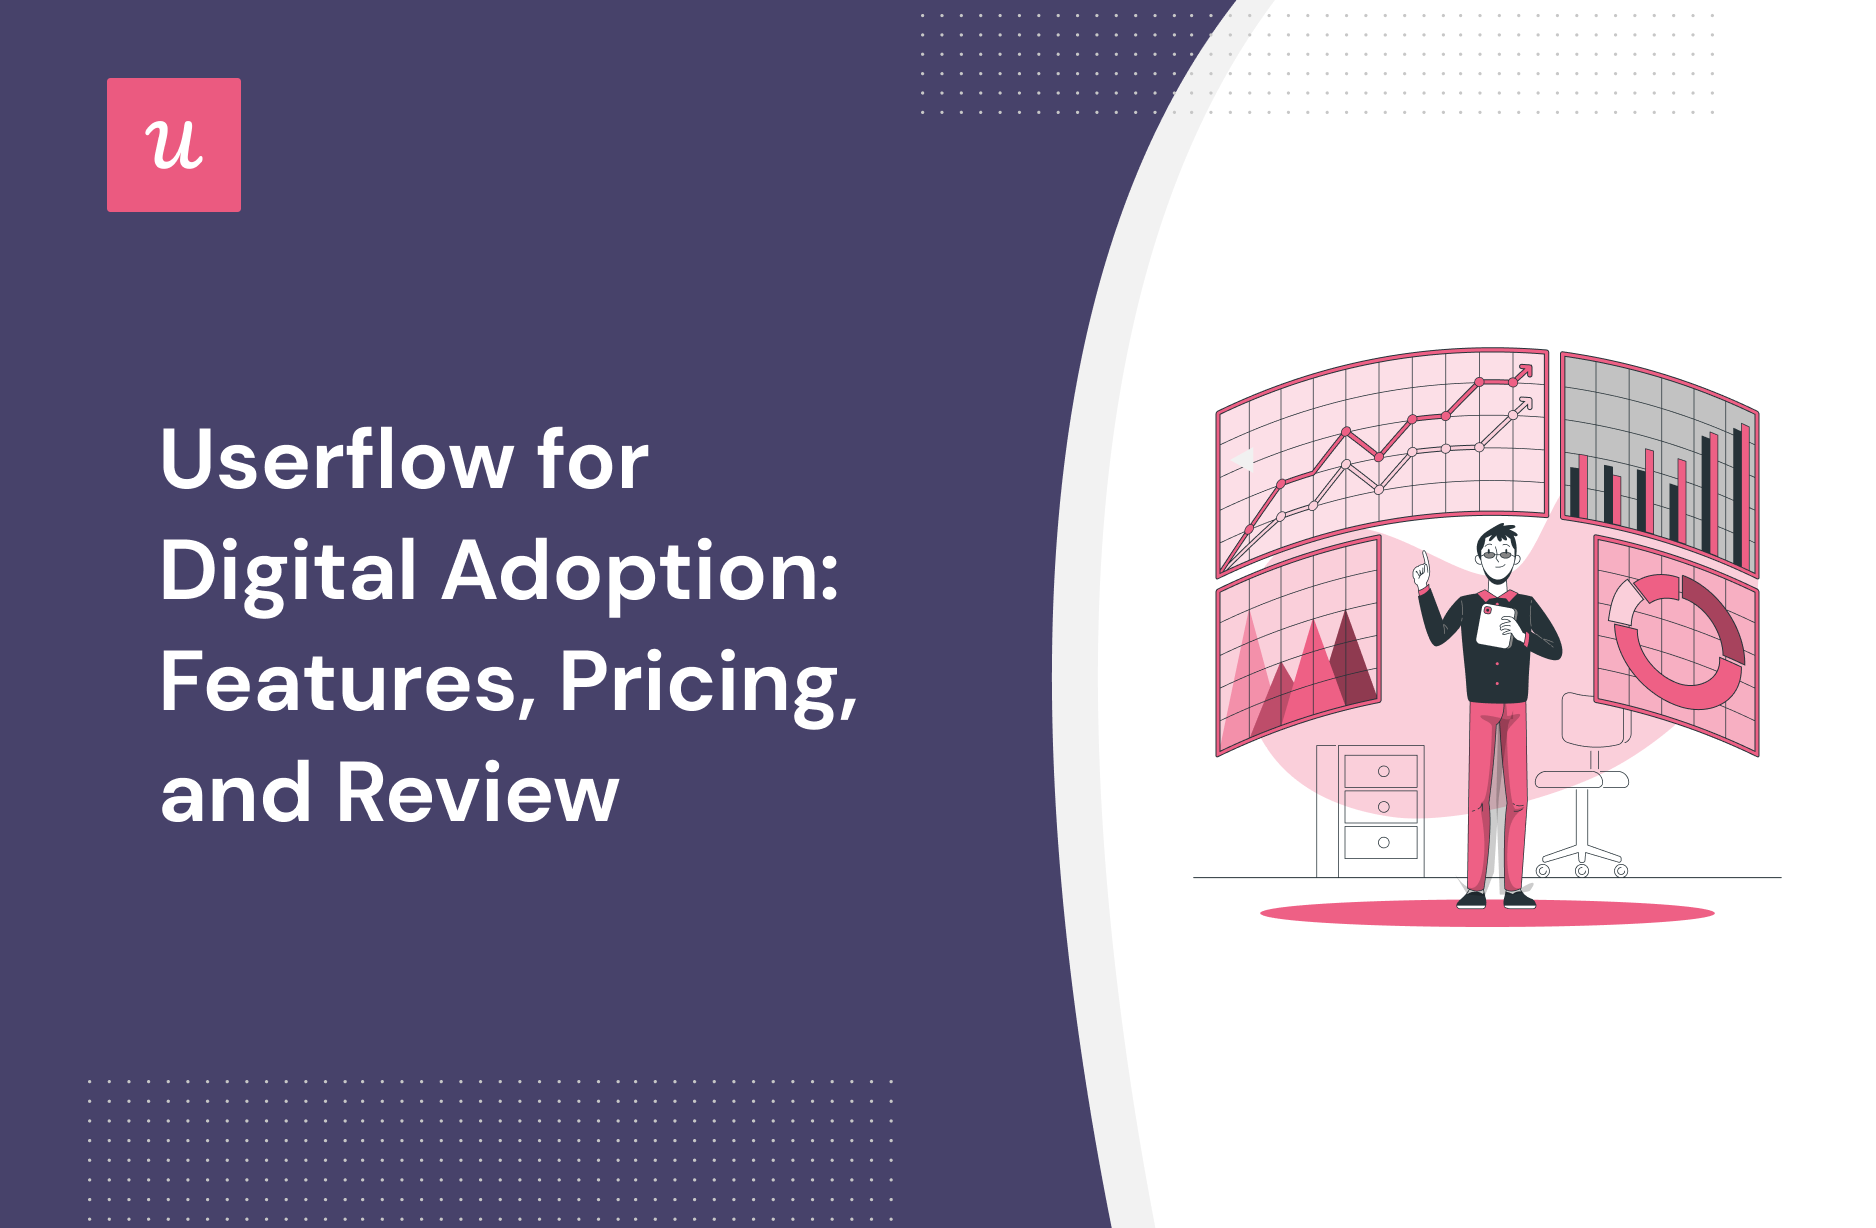 Userflow for Digital Adoption: Features, Pricing, and Review